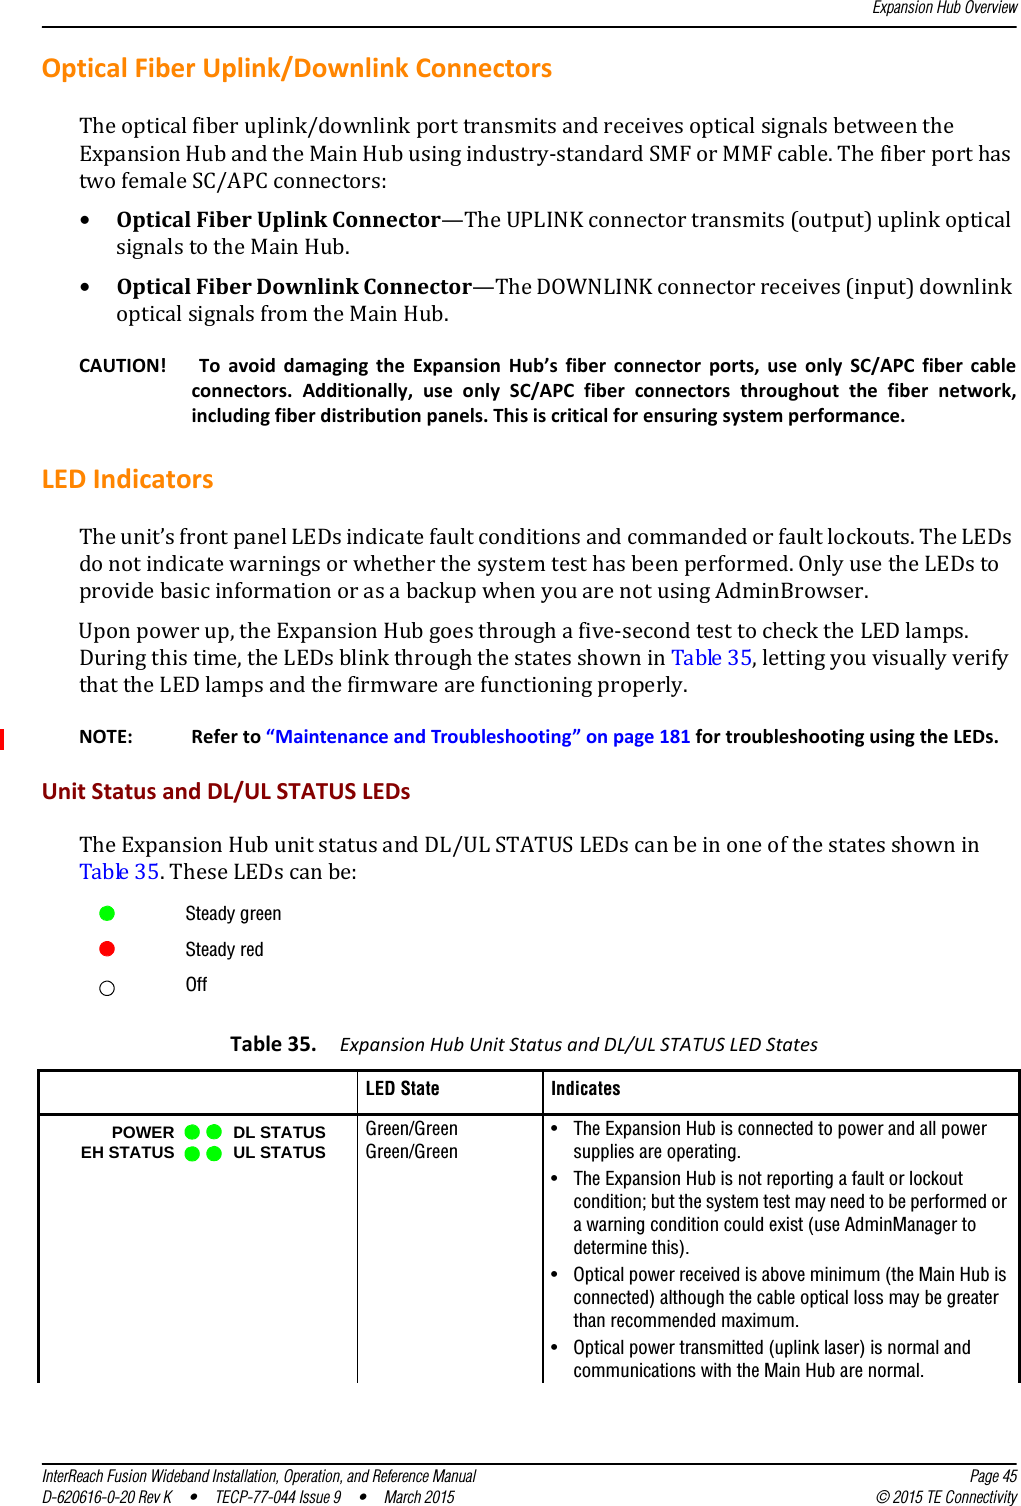 Expansion Hub OverviewInterReach Fusion Wideband Installation, Operation, and Reference Manual Page 45D-620616-0-20 Rev K  •  TECP-77-044 Issue 9  •  March 2015 © 2015 TE ConnectivityOptical Fiber Uplink/Downlink ConnectorsThe optical fiber uplink/downlink port transmits and receives optical signals between the Expansion Hub and the Main Hub using industry-standard SMF or MMF cable. The fiber port has two female SC/APC connectors:•Optical Fiber Uplink Connector—The UPLINK connector transmits (output) uplink optical signals to the Main Hub.•Optical Fiber Downlink Connector—The DOWNLINK connector receives (input) downlink optical signals from the Main Hub.CAUTION!  To avoid damaging the Expansion Hub’s fiber connector ports, use only SC/APC fiber cable connectors. Additionally, use only SC/APC fiber connectors throughout the fiber network, including fiber distribution panels. This is critical for ensuring system performance.LED IndicatorsThe unit’s front panel LEDs indicate fault conditions and commanded or fault lockouts. The LEDs do not indicate warnings or whether the system test has been performed. Only use the LEDs to provide basic information or as a backup when you are not using AdminBrowser.Upon power up, the Expansion Hub goes through a five-second test to check the LED lamps. During this time, the LEDs blink through the states shown in Table 35, letting you visually verify that the LED lamps and the firmware are functioning properly.NOTE: Refer to “Maintenance and Troubleshooting” on page 181 for troubleshooting using the LEDs.Unit Status and DL/UL STATUS LEDsThe Expansion Hub unit status and DL/UL STATUS LEDs can be in one of the states shown in Table 35. These LEDs can be:Steady greenSteady redOffTable 35. Expansion Hub Unit Status and DL/UL STATUS LED States  LED State IndicatesGreen/Green Green/Green• The Expansion Hub is connected to power and all power supplies are operating.• The Expansion Hub is not reporting a fault or lockout condition; but the system test may need to be performed or a warning condition could exist (use AdminManager to determine this).• Optical power received is above minimum (the Main Hub is connected) although the cable optical loss may be greater than recommended maximum.• Optical power transmitted (uplink laser) is normal and communications with the Main Hub are normal.POWEREH STATUS DL STATUSUL STATUS